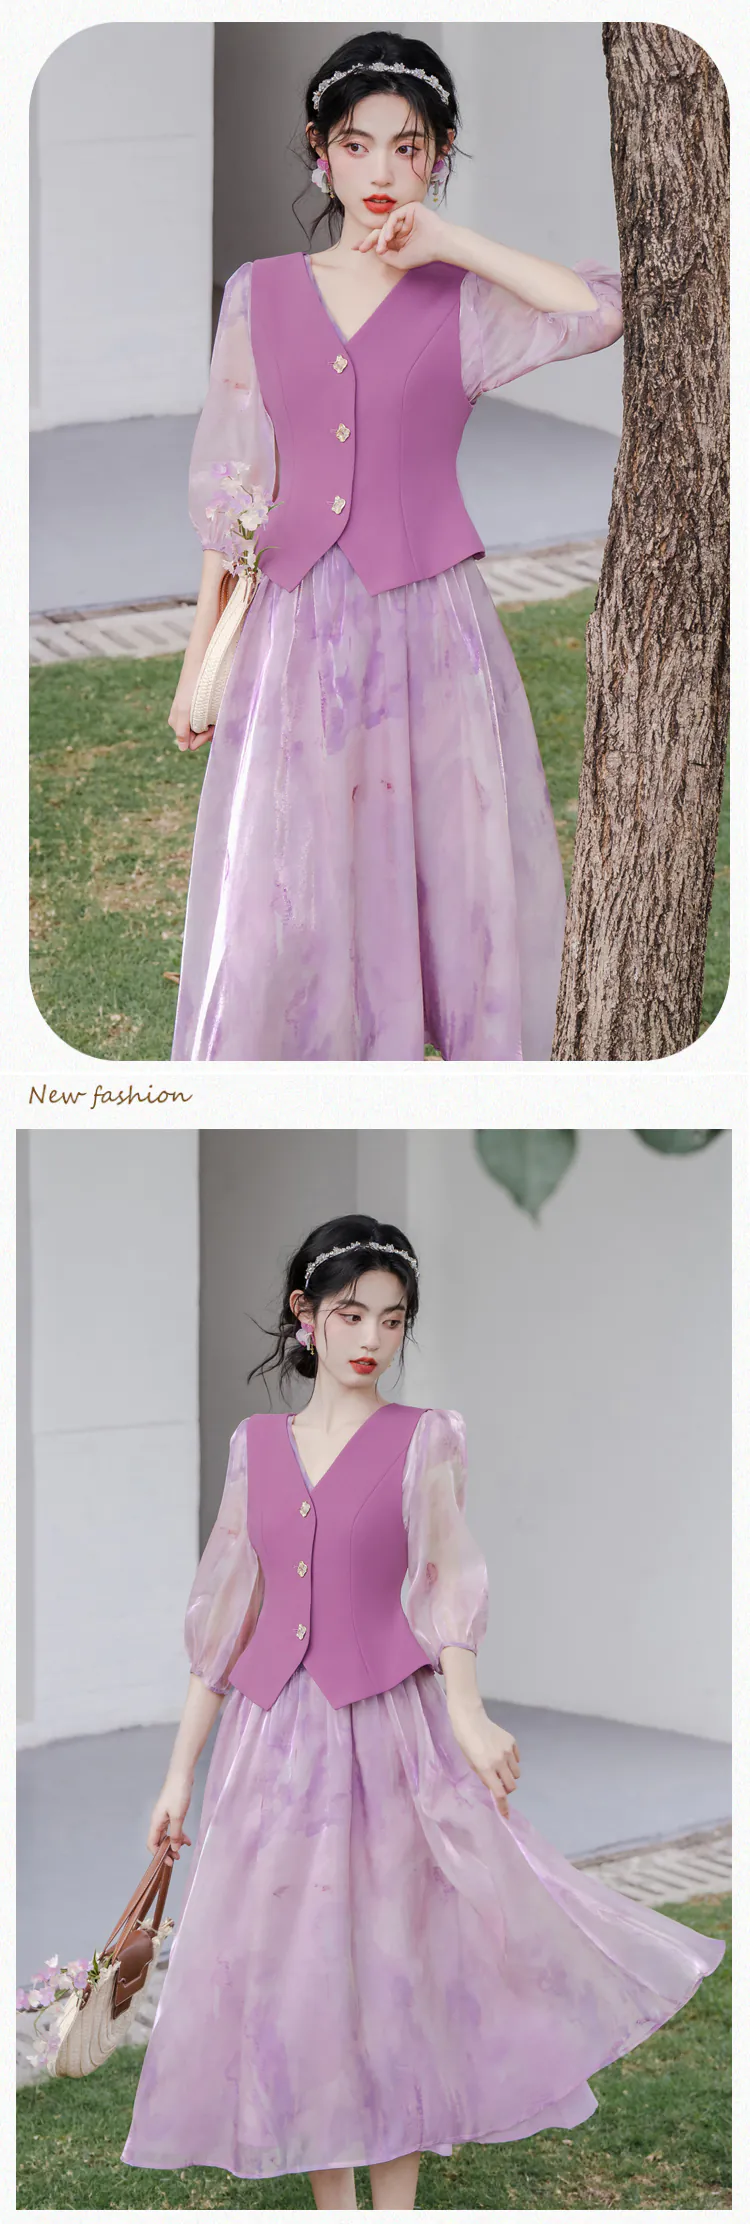 Fairy-Gentle-Purple-Vest-with-Thin-Chiffon-Summer-Casual-Dress-Suit11